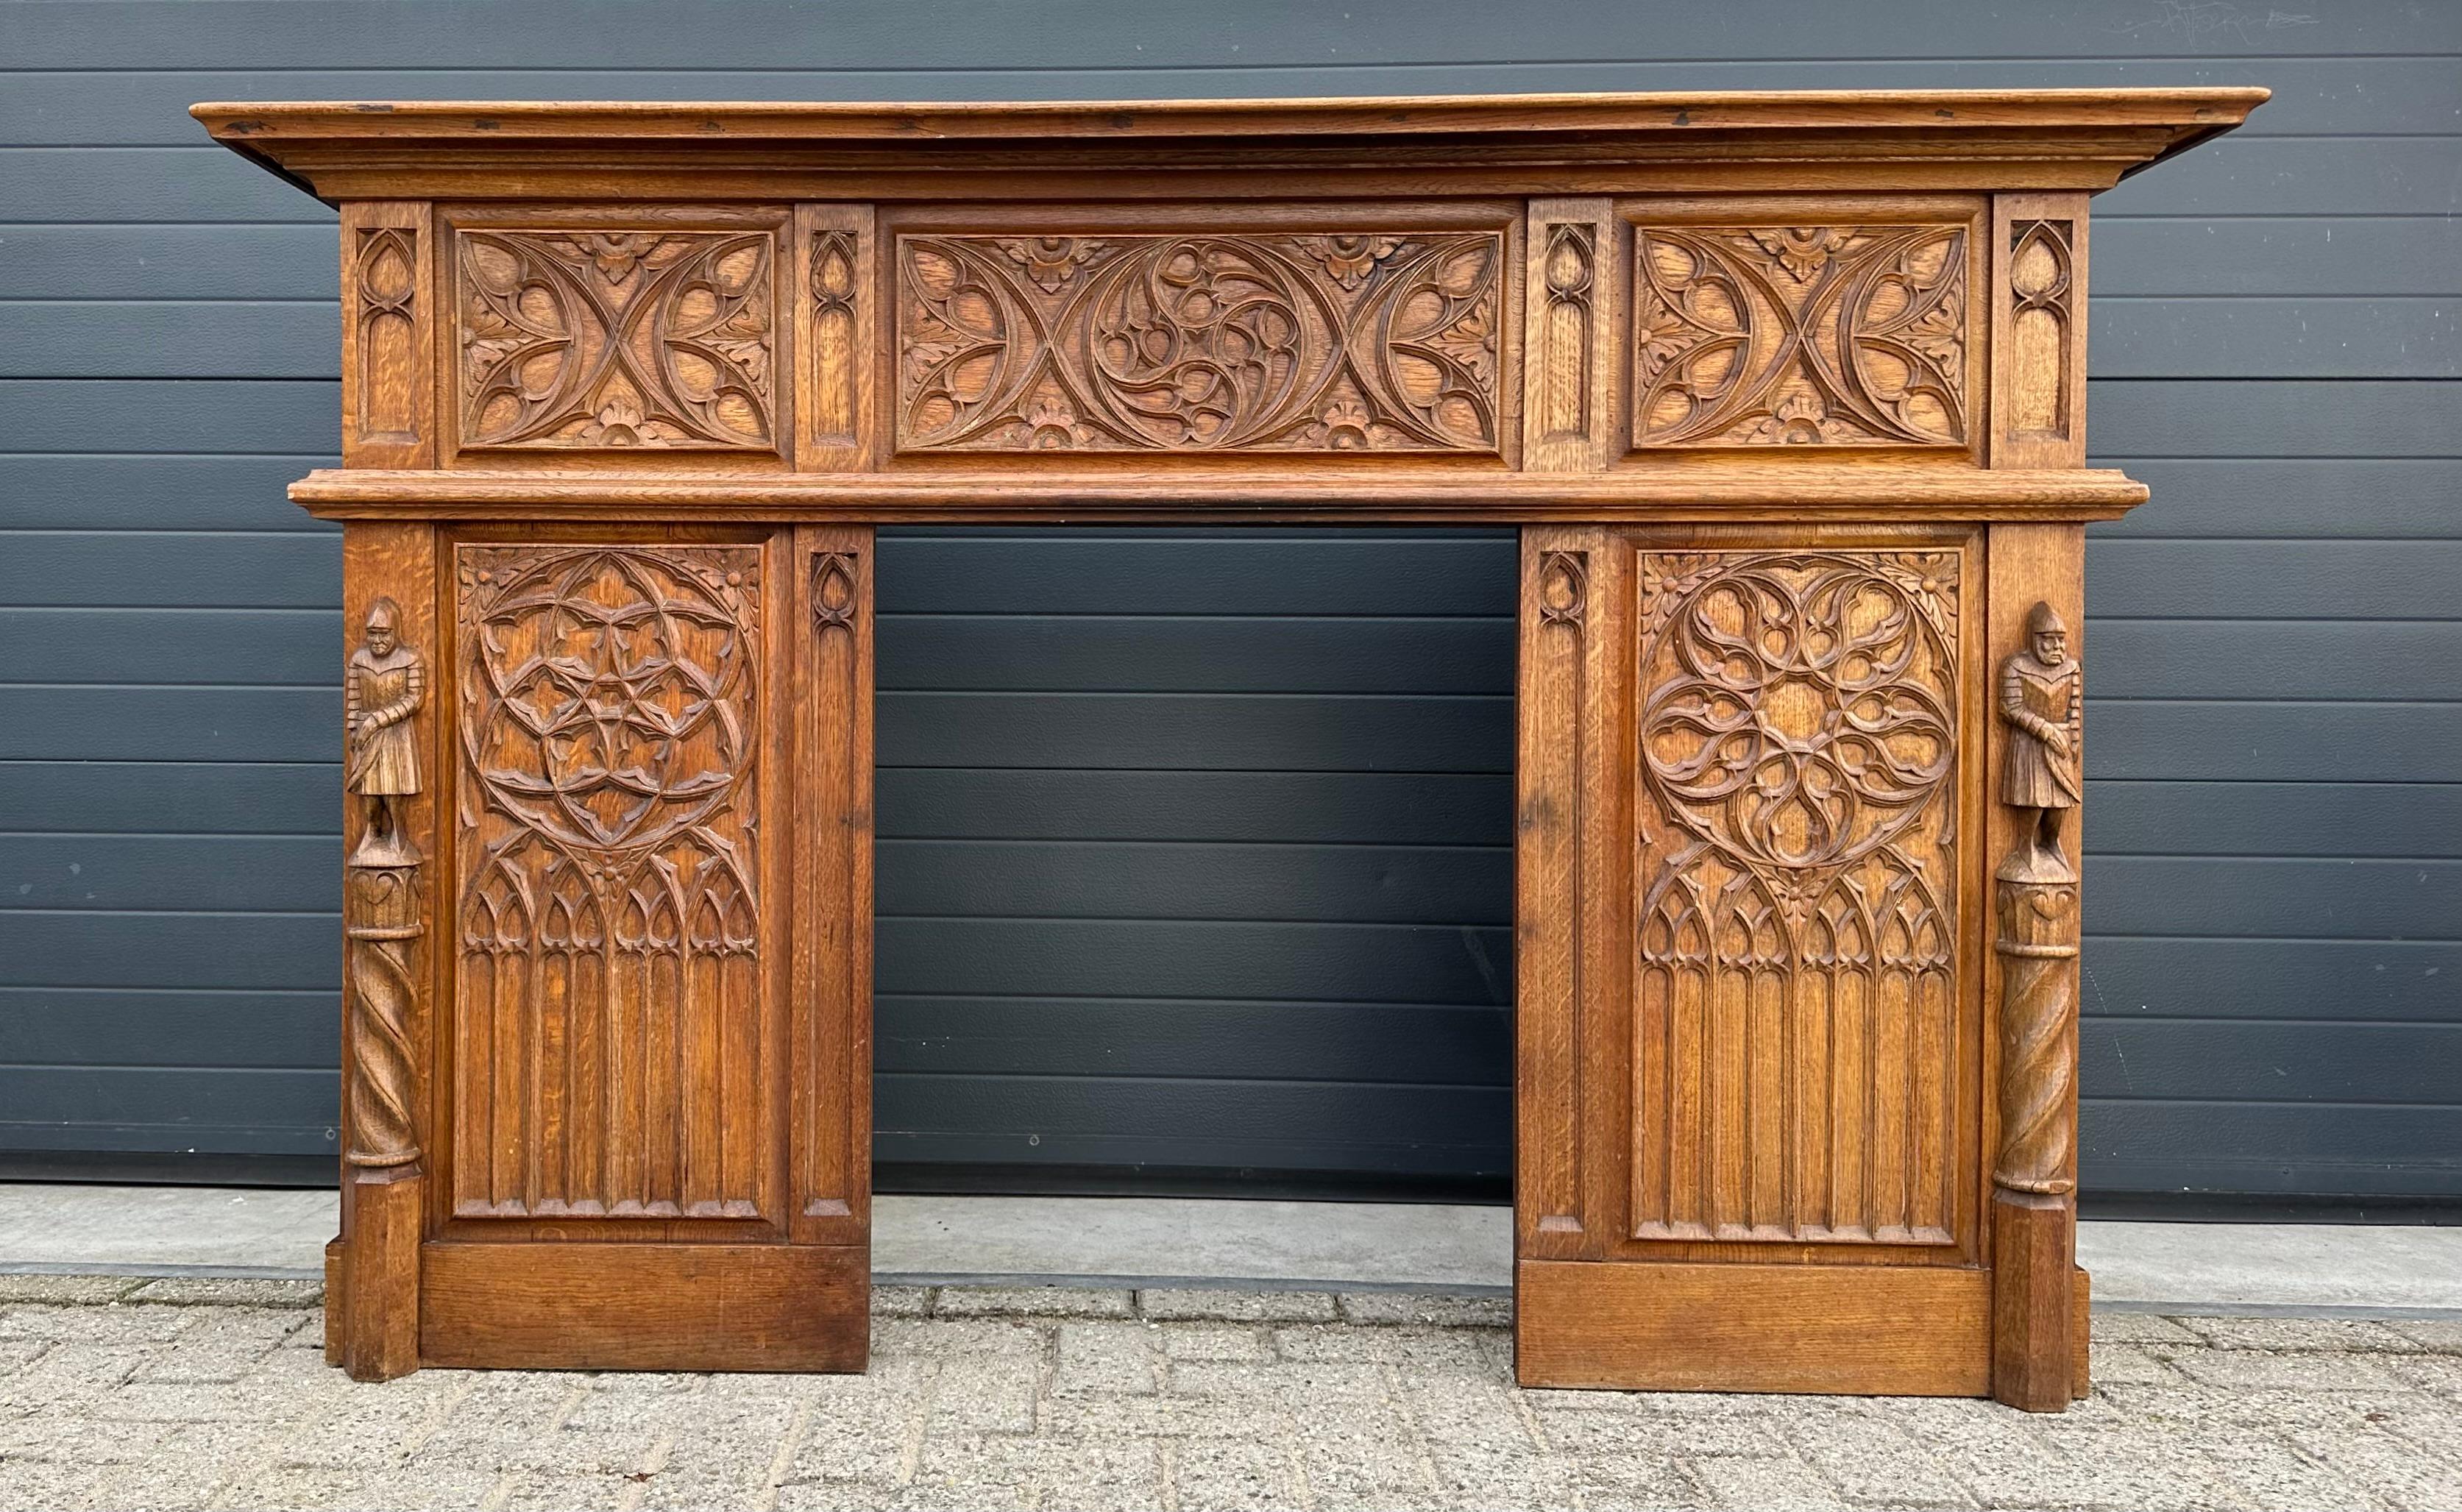 Gothic Revival Oak Fireplace Mantel with Carved Church Window Panels & Guards In Good Condition For Sale In Lisse, NL